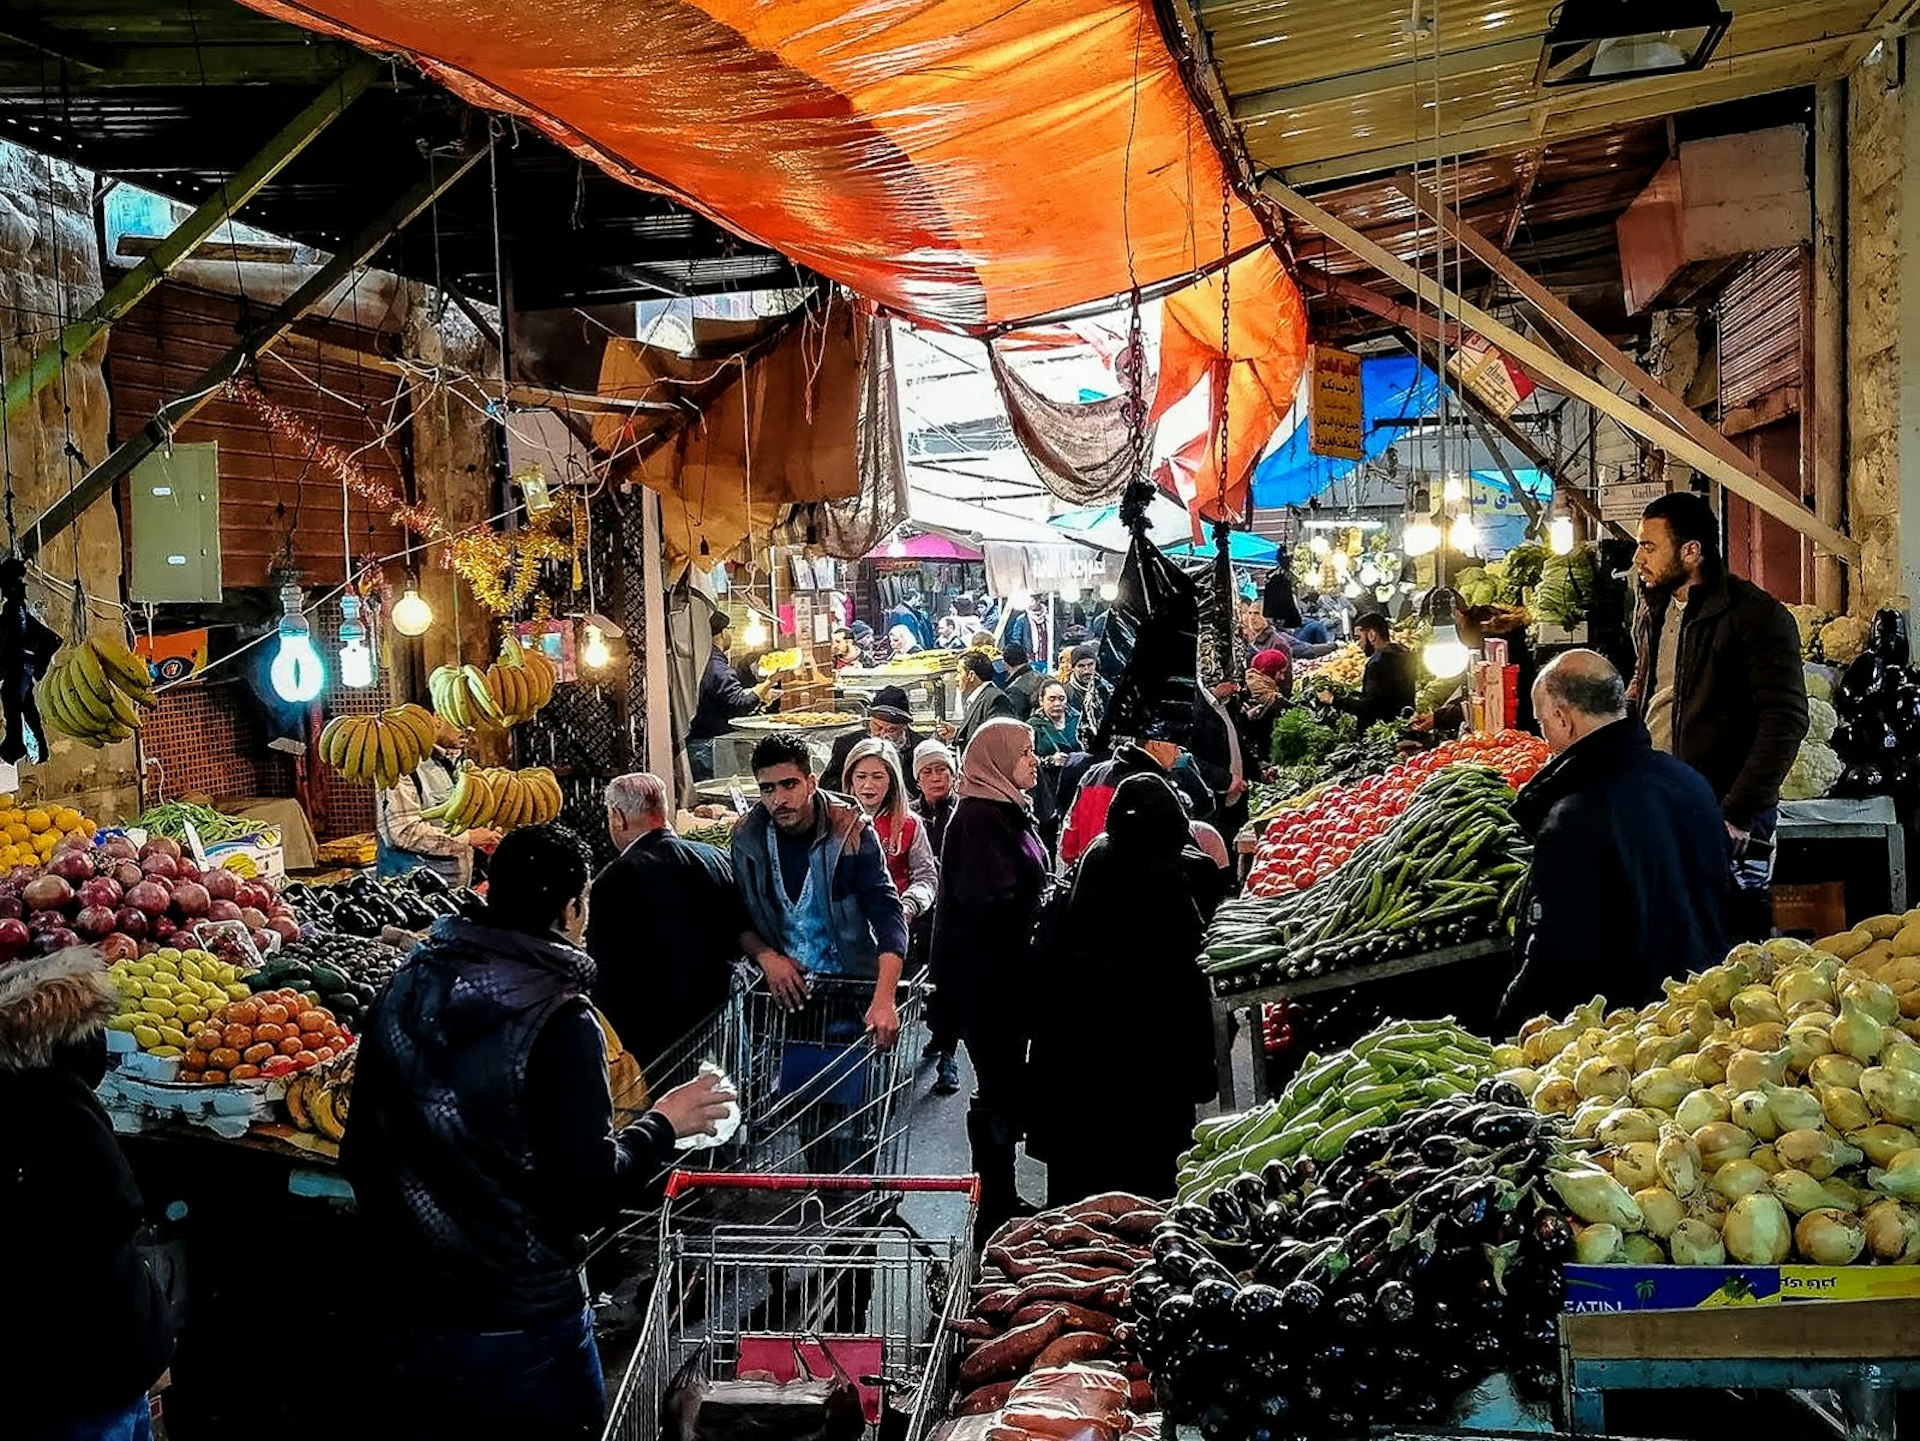 Fruit and vegetables are piled high on both sides of a narrow walkway under a covered market; shoppers push carts or carry bags, while sellers stand behind their goods on raised platforms; Free things to do in Amman, Jordan